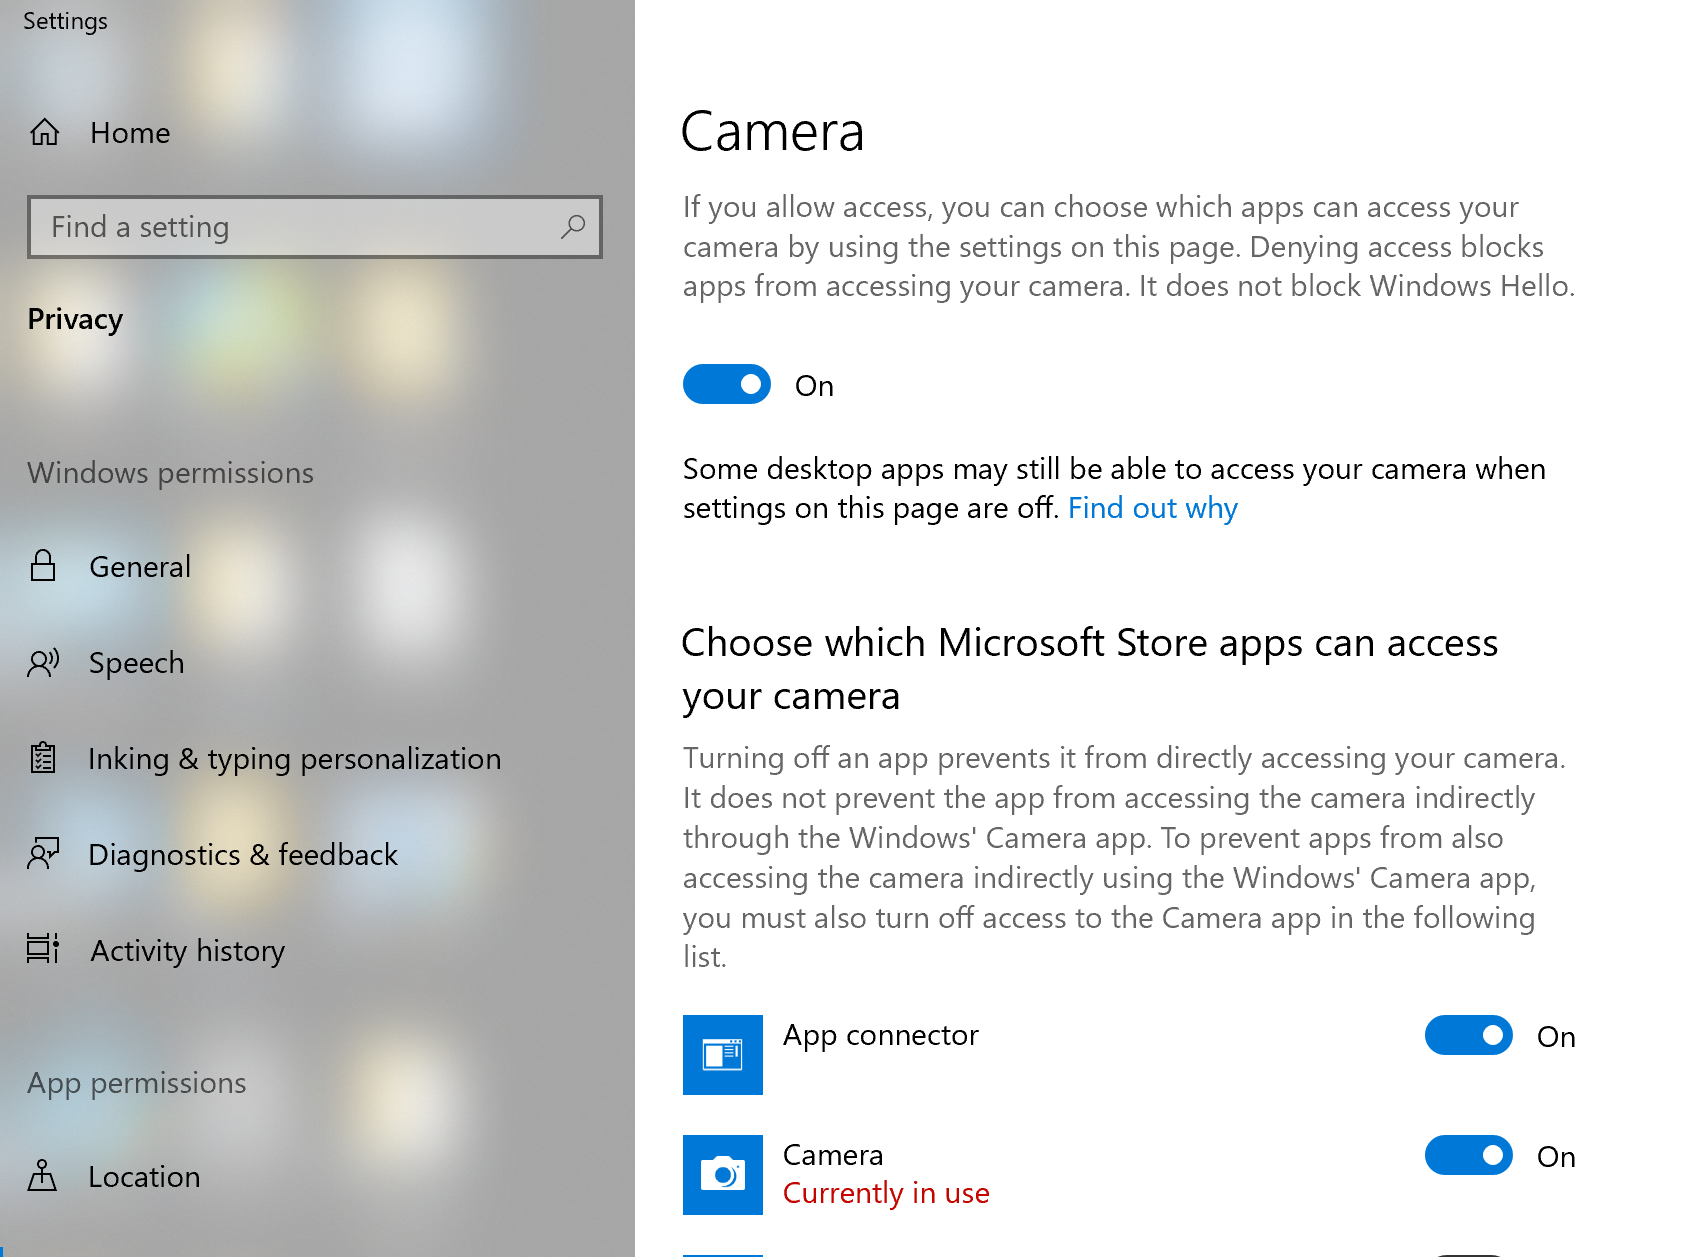 MS Store apps list